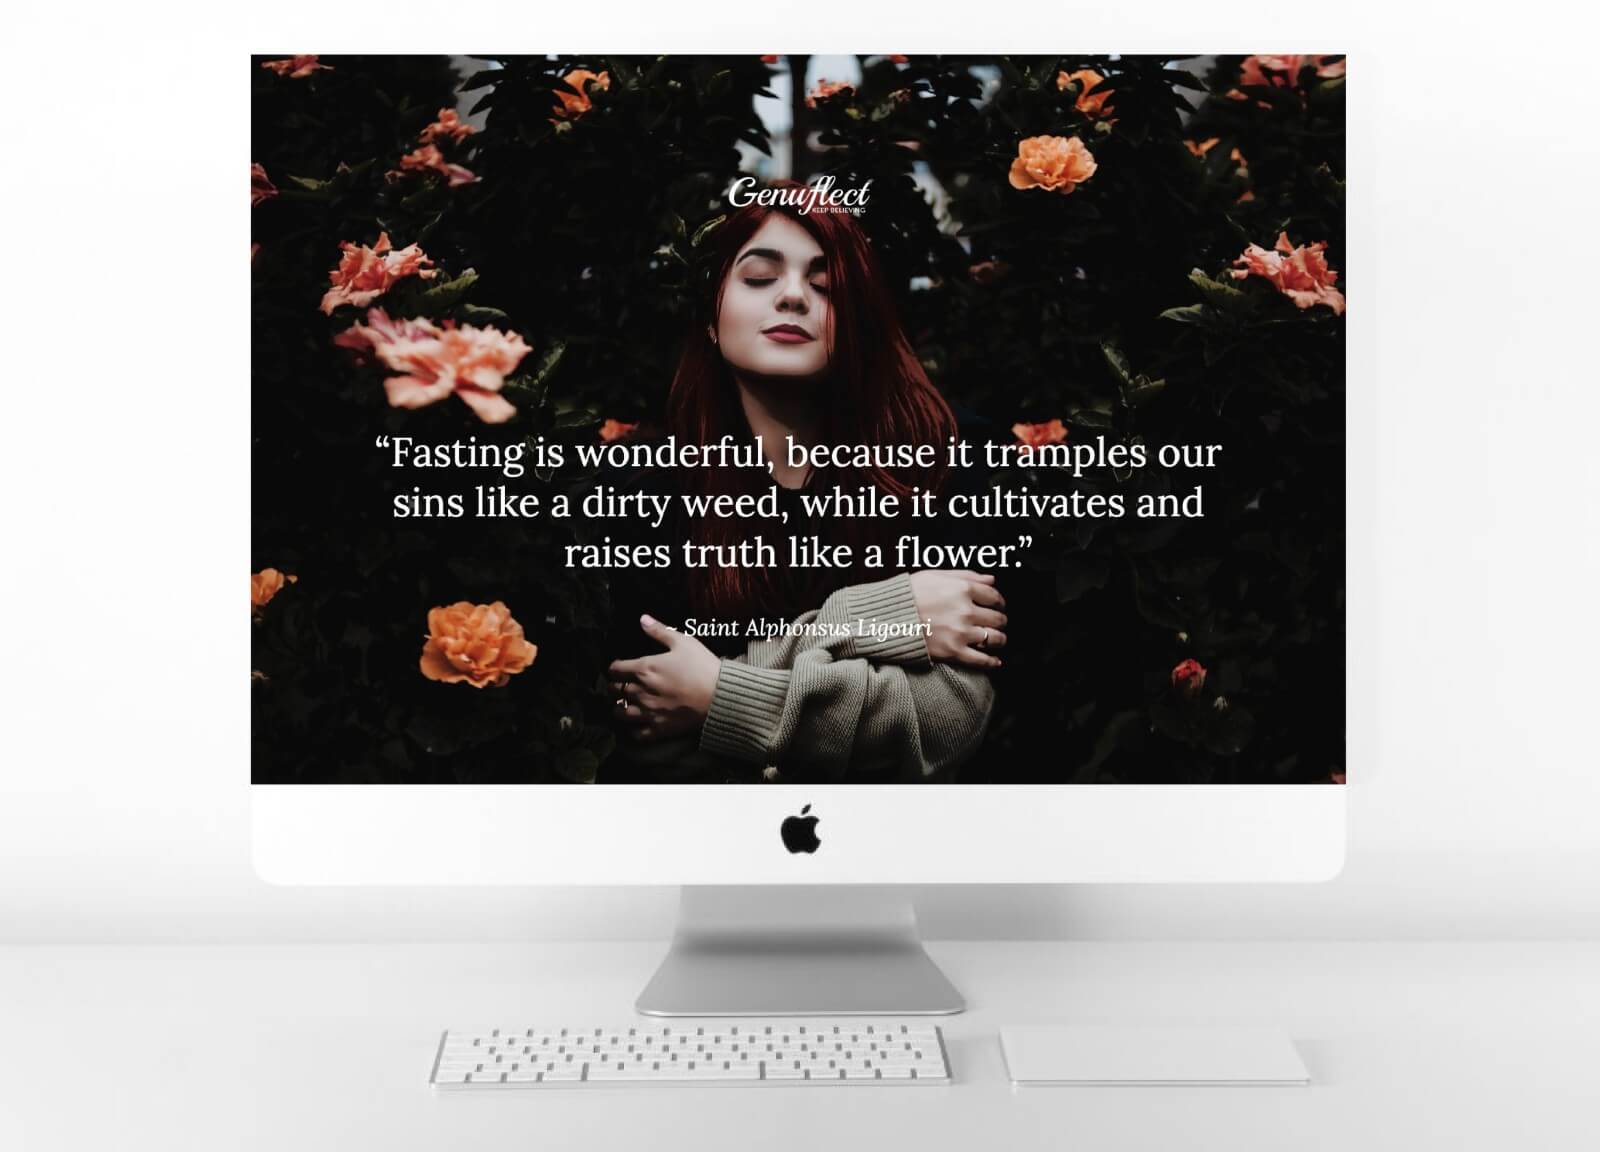 Genuflect computer background image of a Woman standing outside in front of rose bushes with her eyes closed, arms folded, and a soft smile on her face